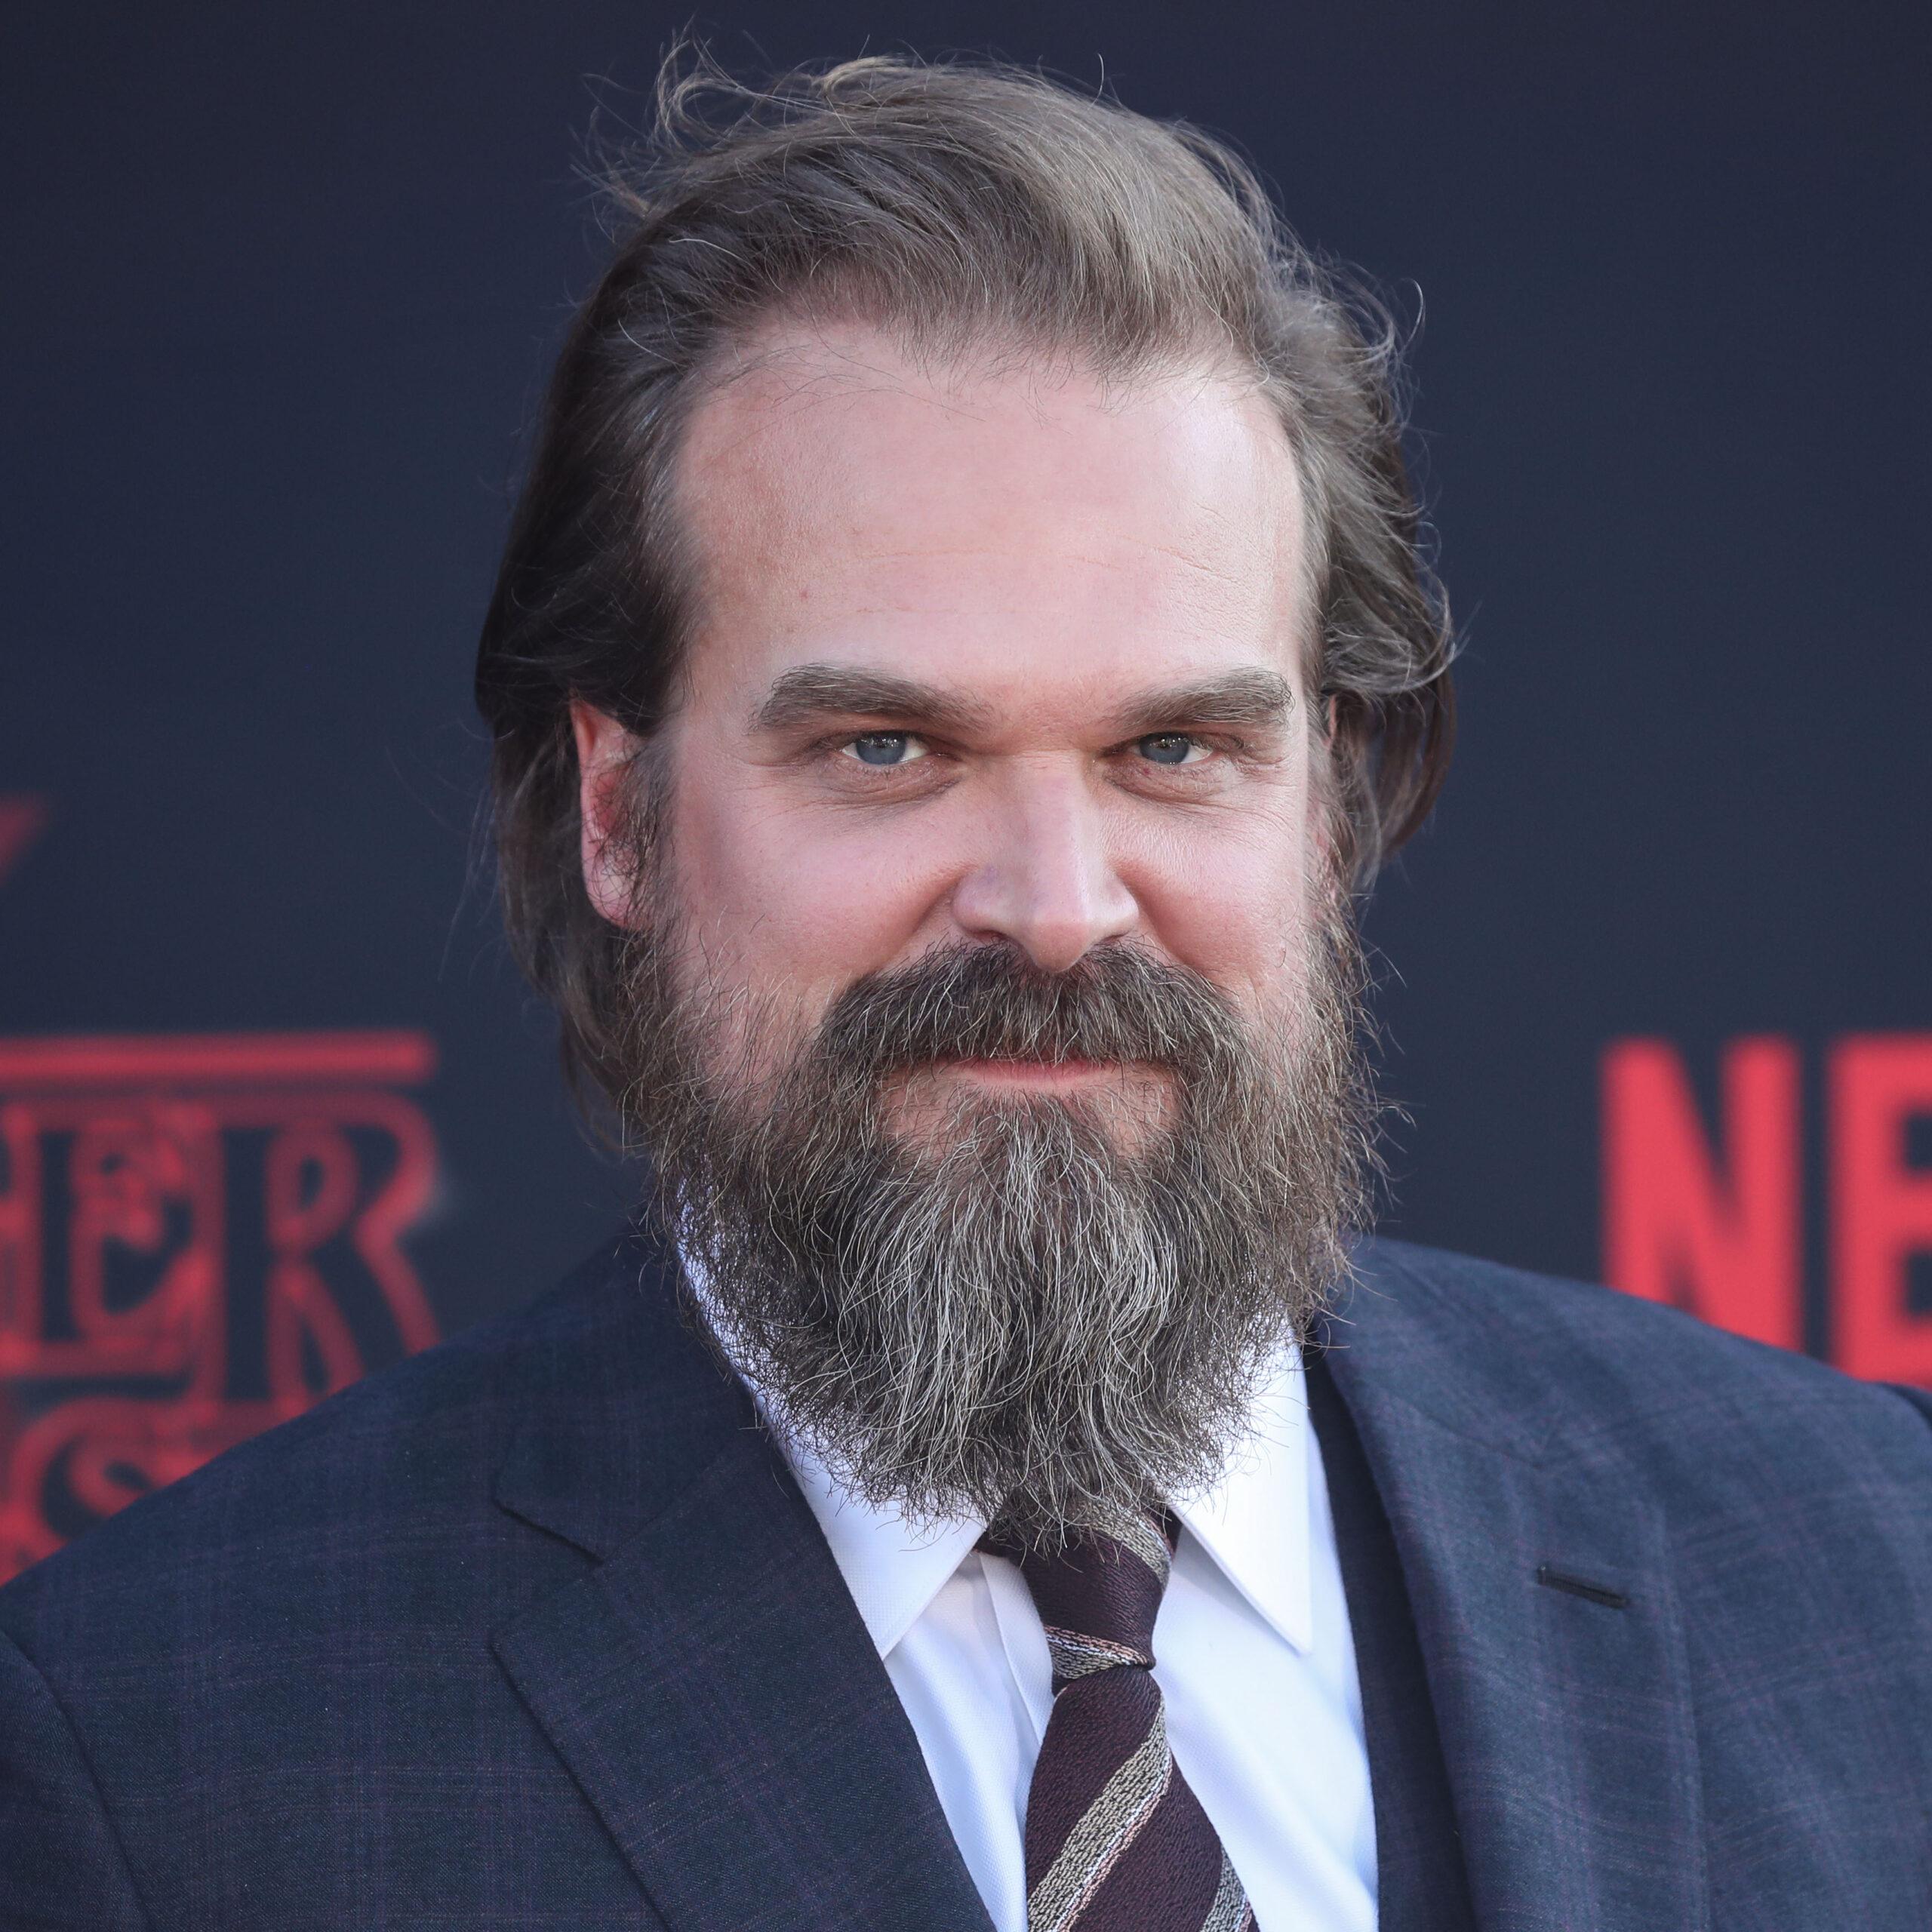 David Harbour at the World Premiere Of Netflix's 'Stranger Things' Season 3